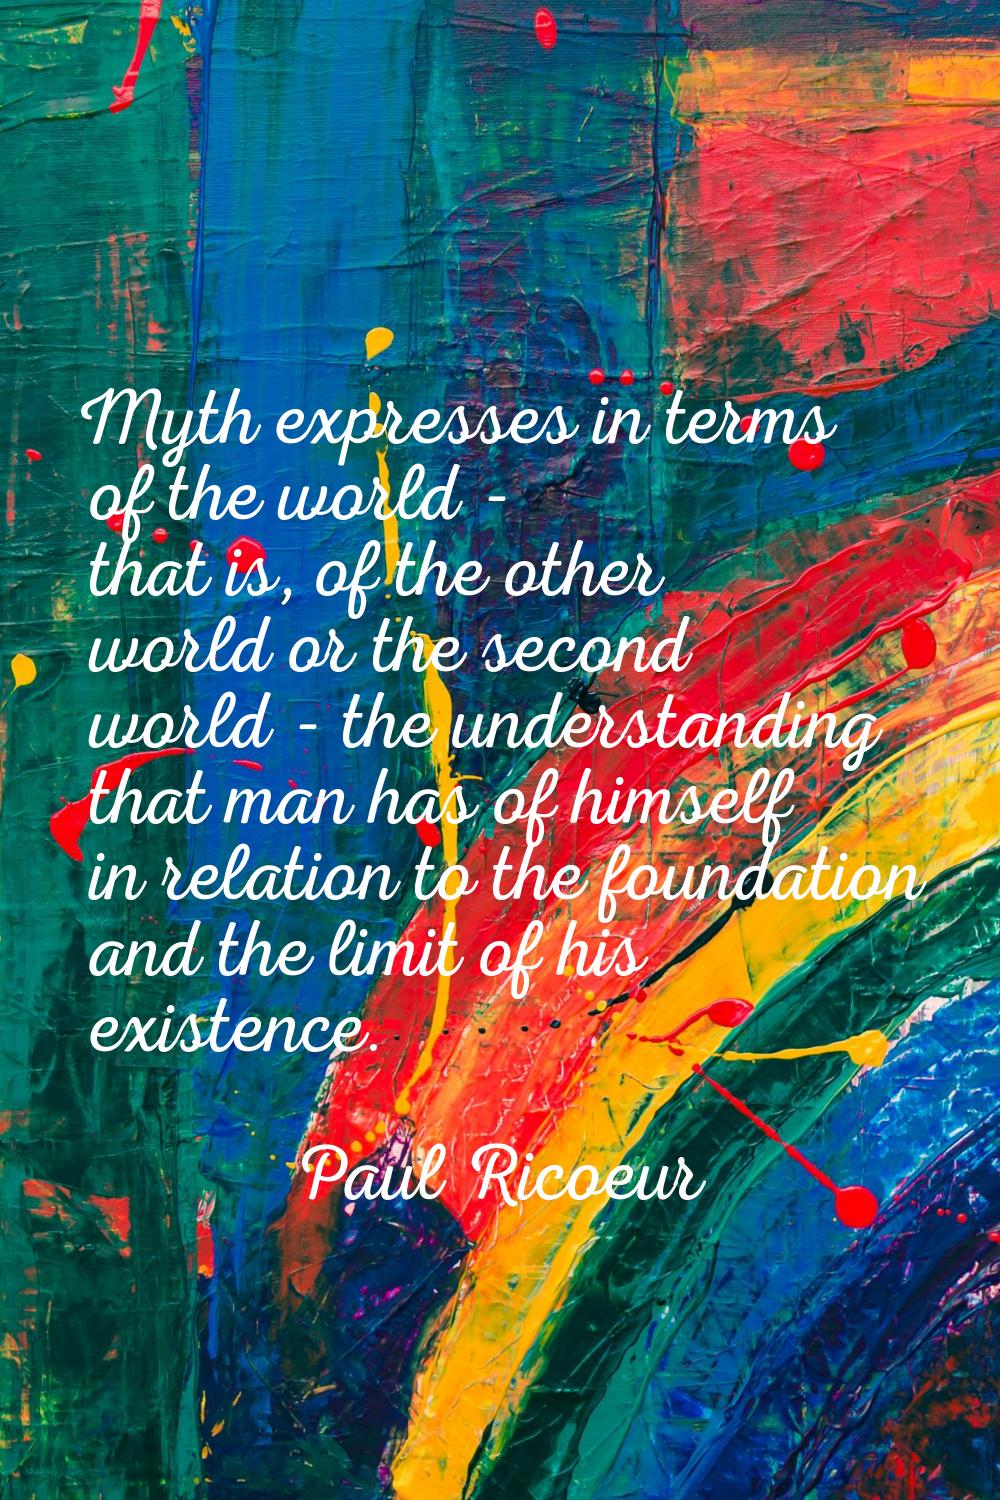 Myth expresses in terms of the world - that is, of the other world or the second world - the unders